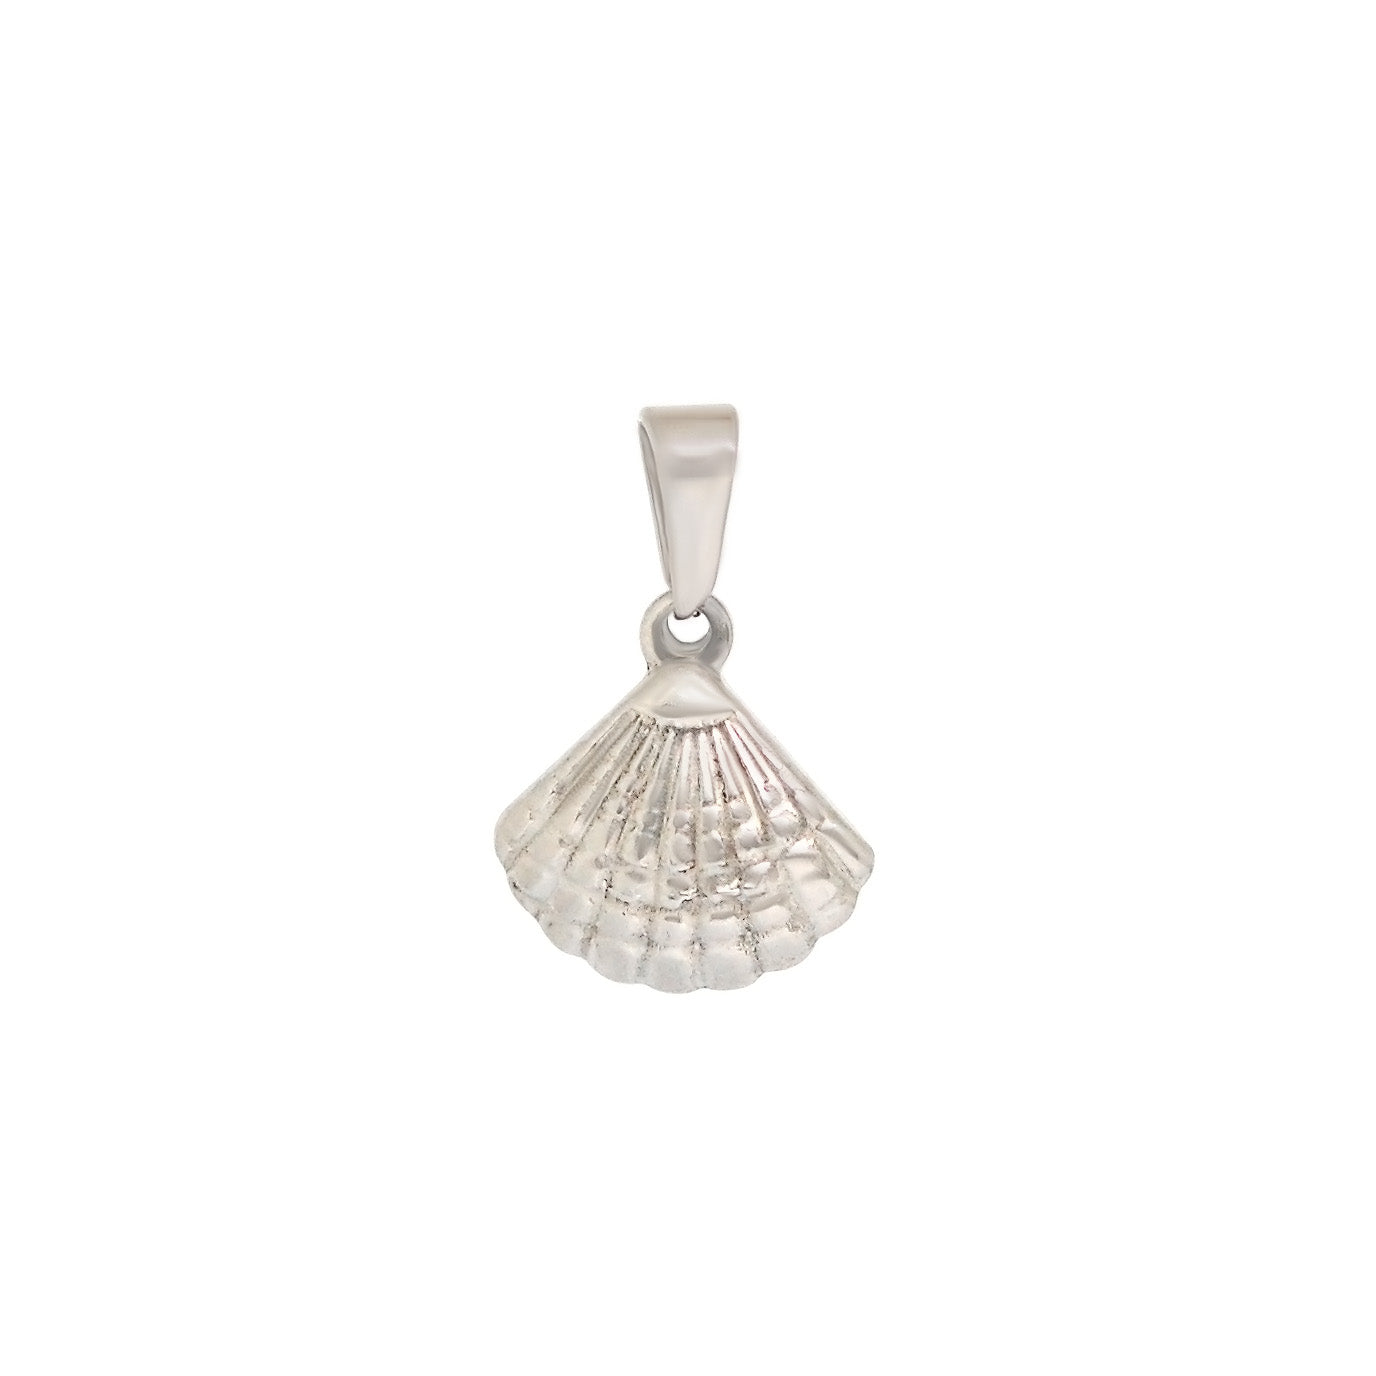 ESP 5728: Pearly Shell Pendant